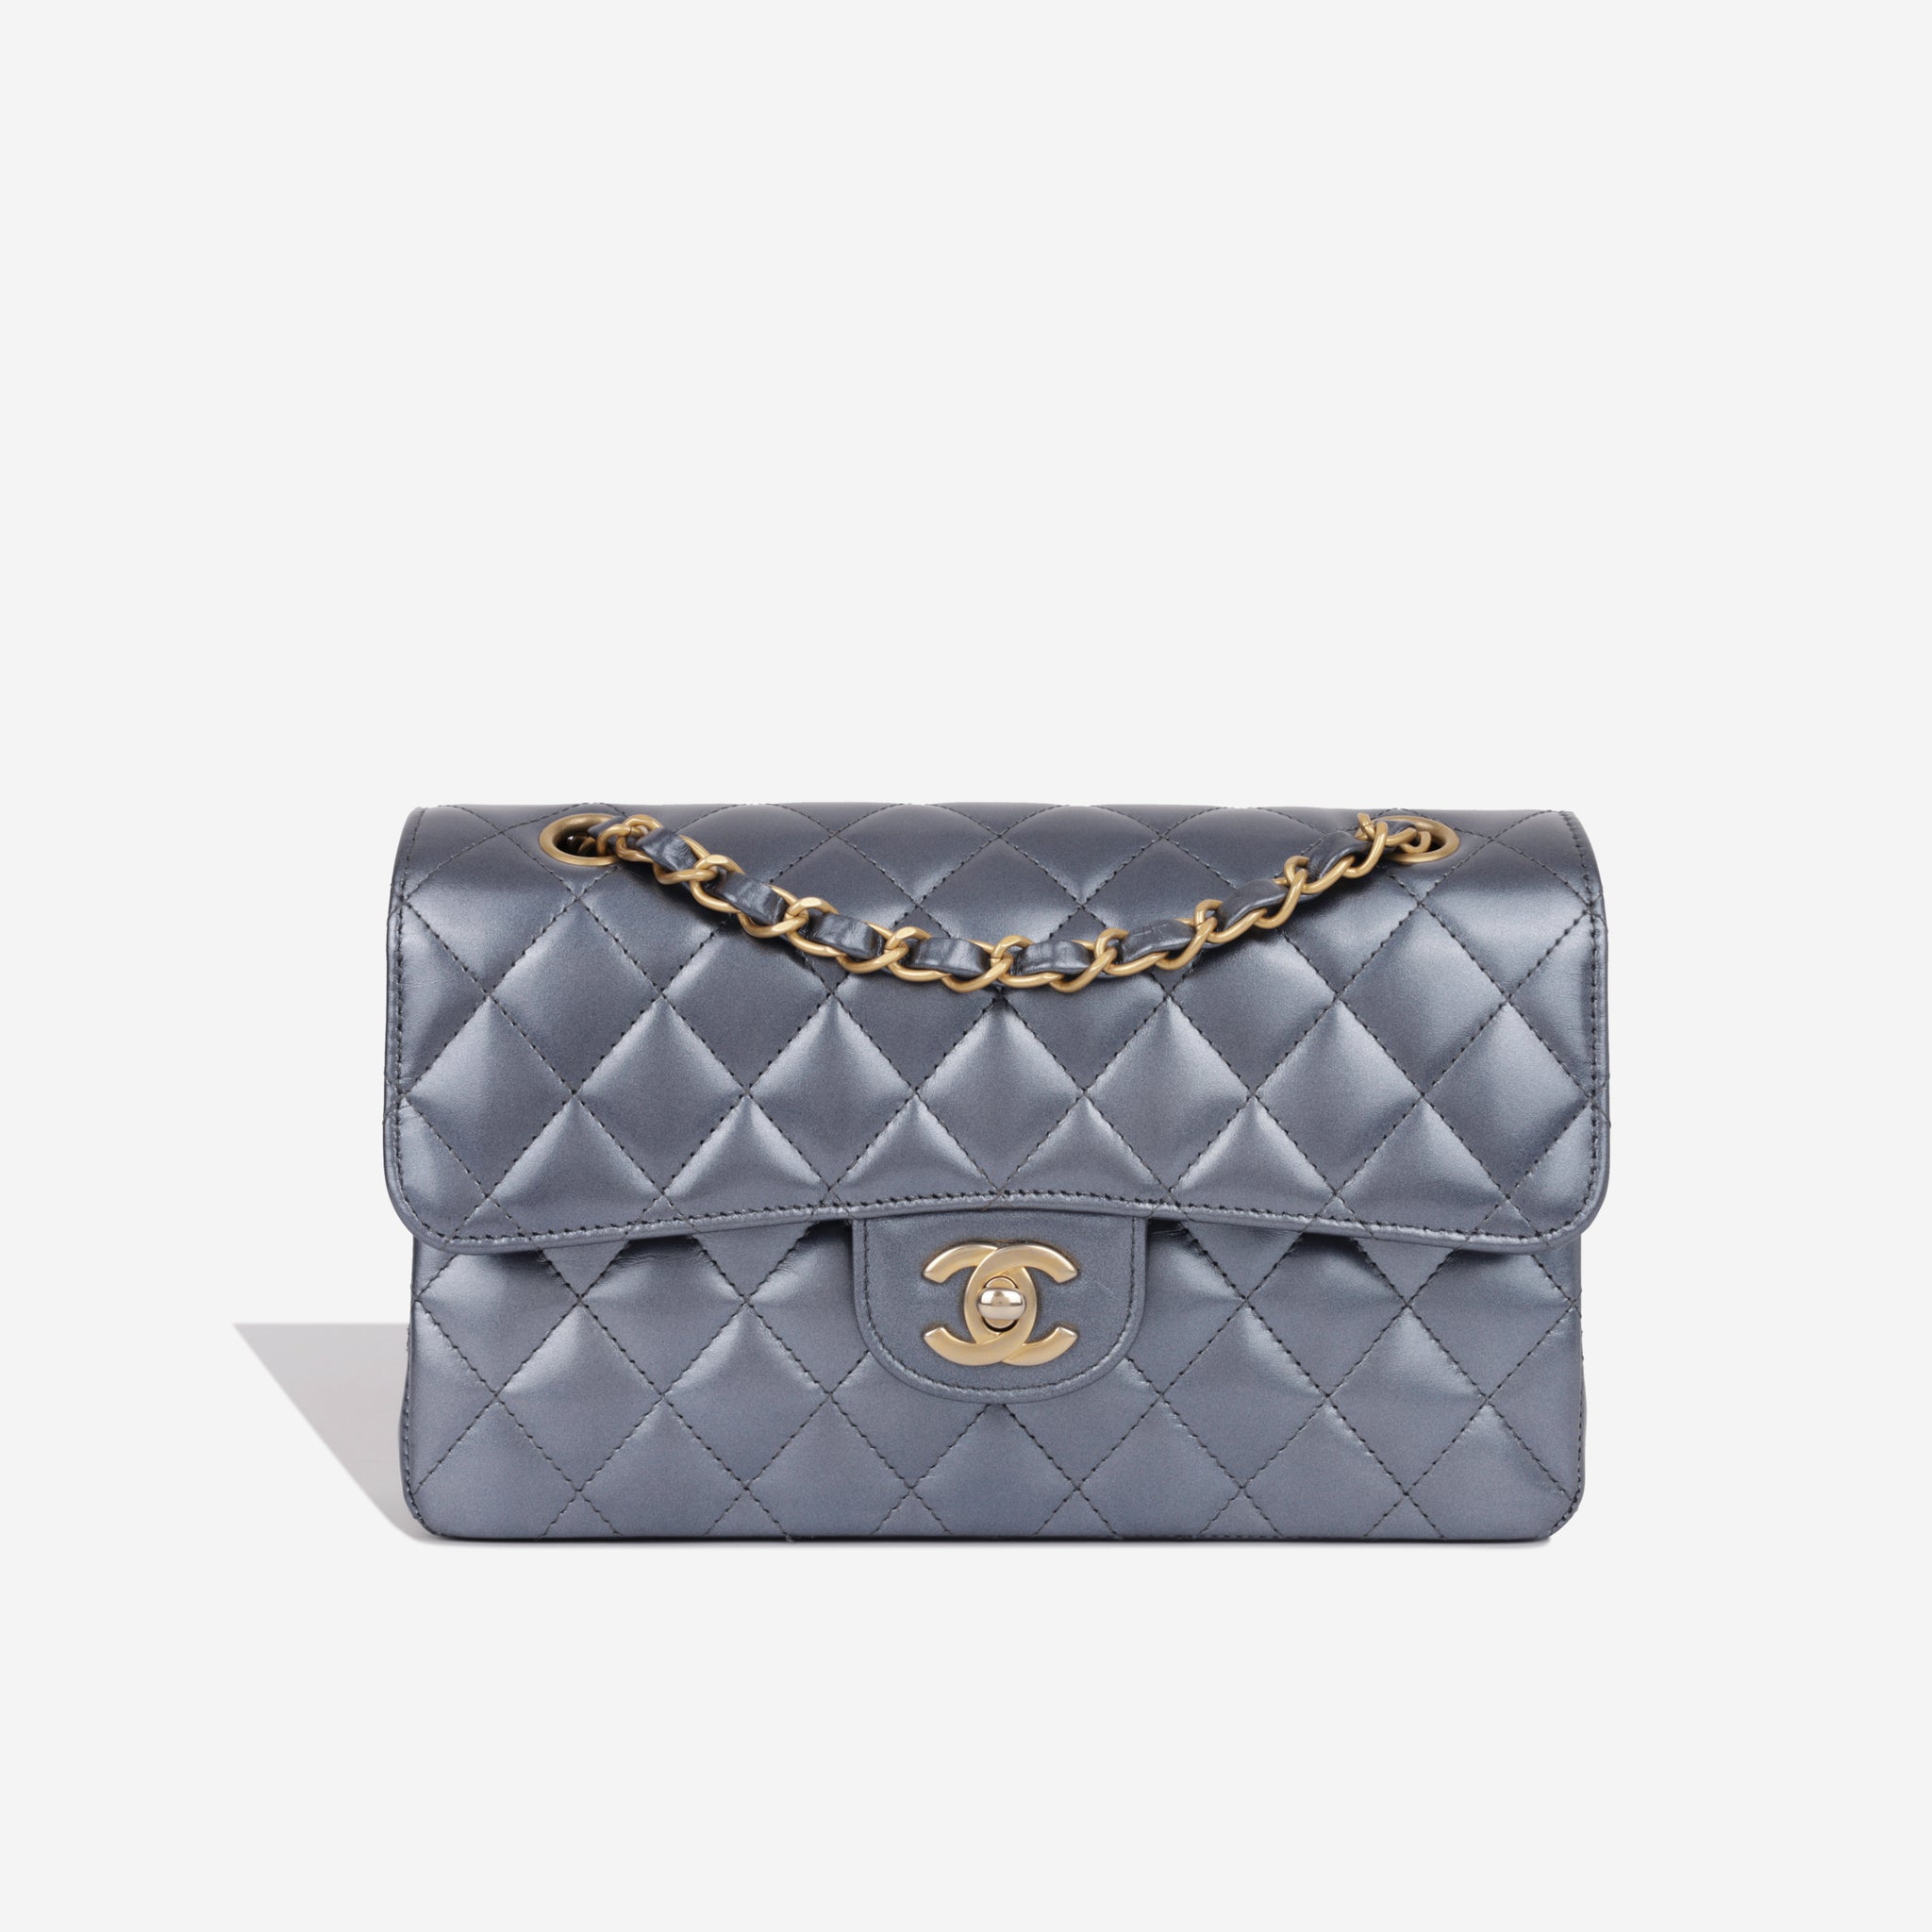 Chanel - Small Classic Flap Bag - Metallic Coated Leather - GHW